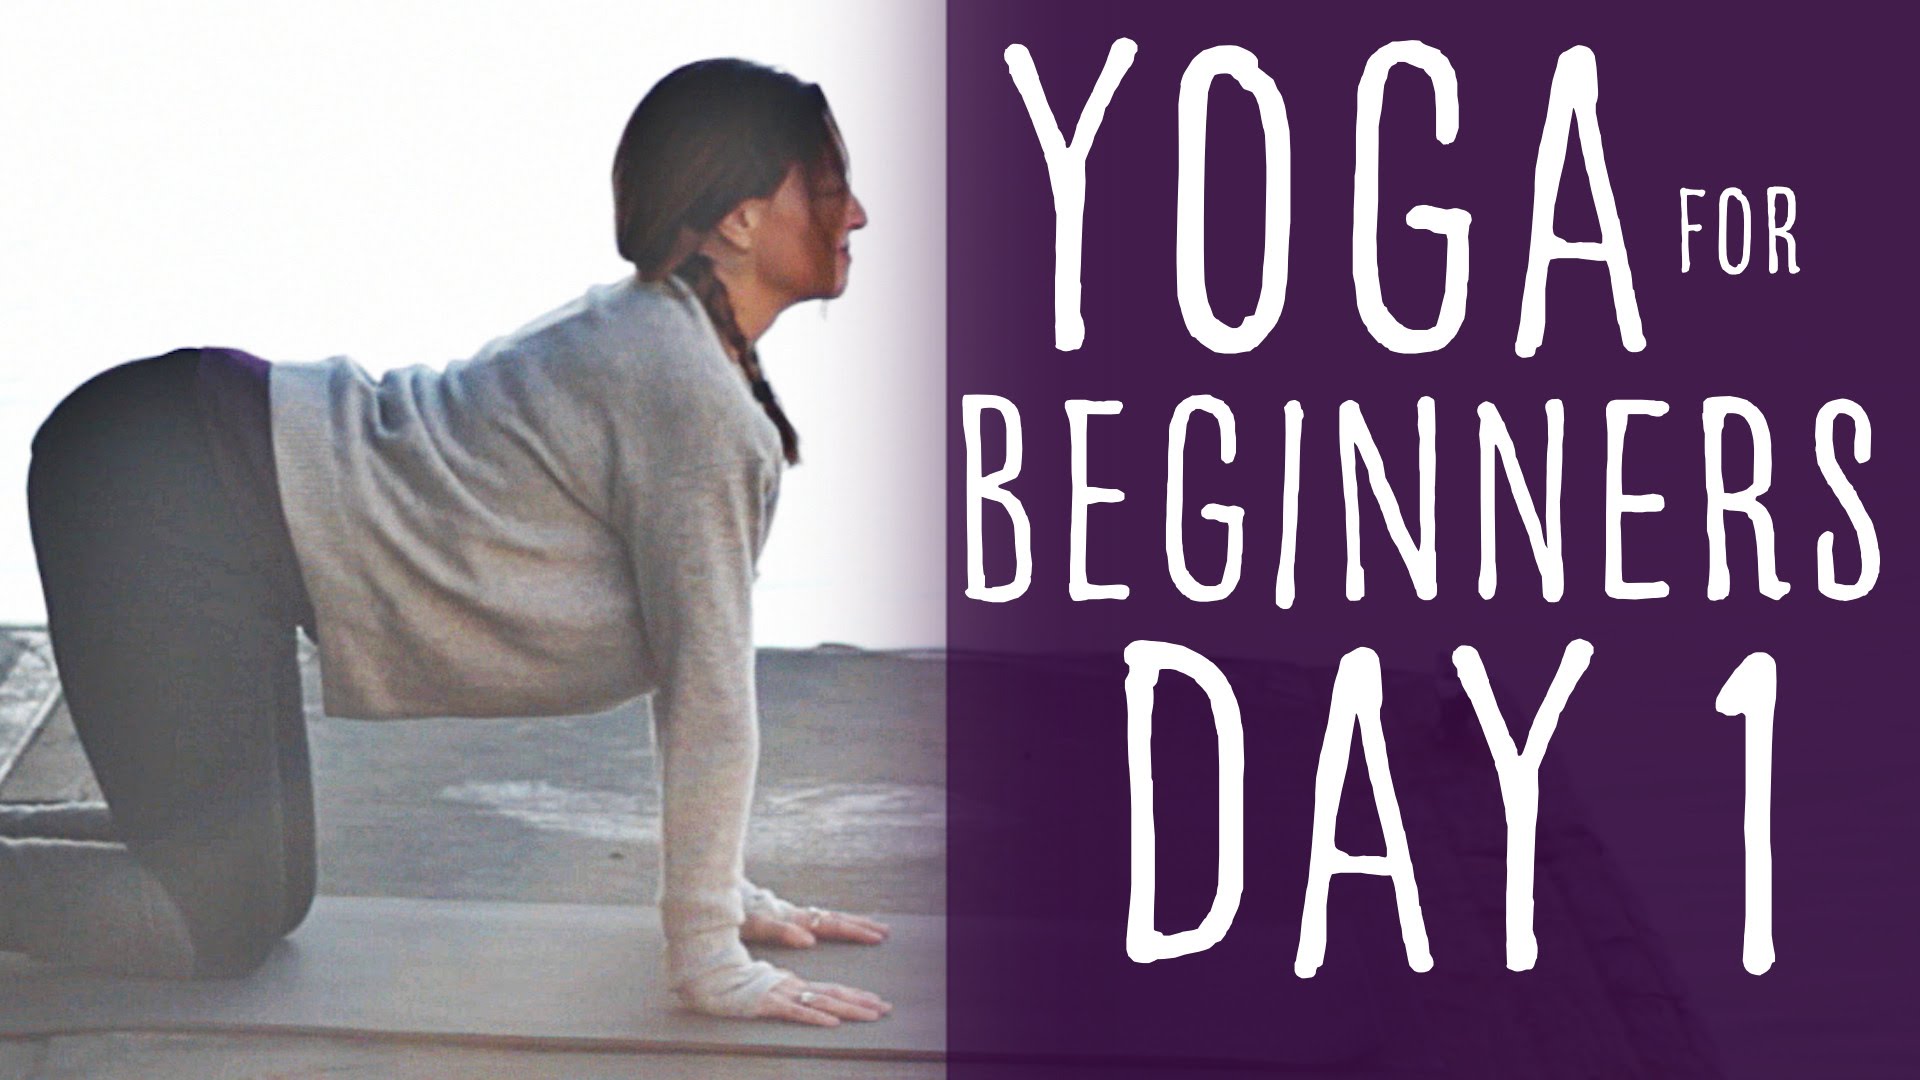 yoga-poses-yoga-for-beginners-30-day-challenge-day-1-with-fightmaster